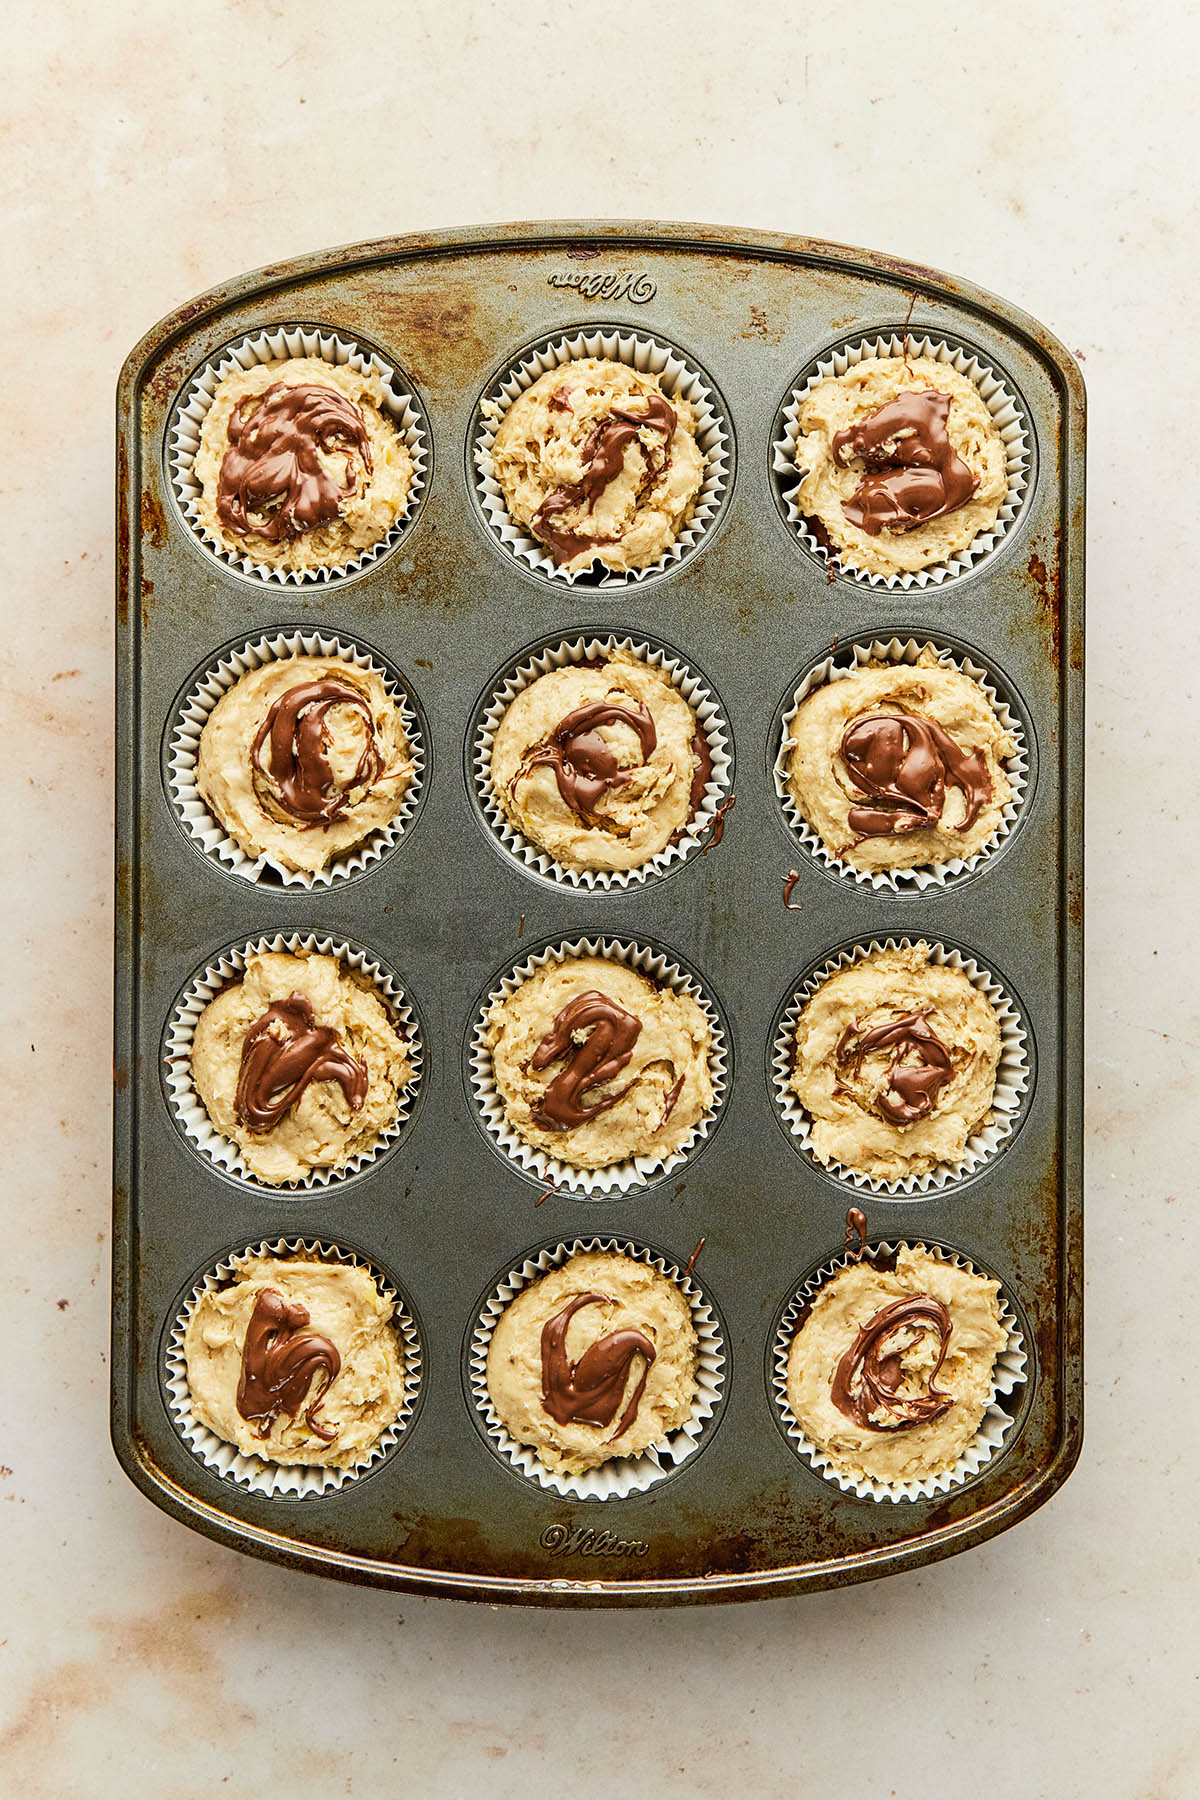 A pan of unbaked banana Nutella muffins.